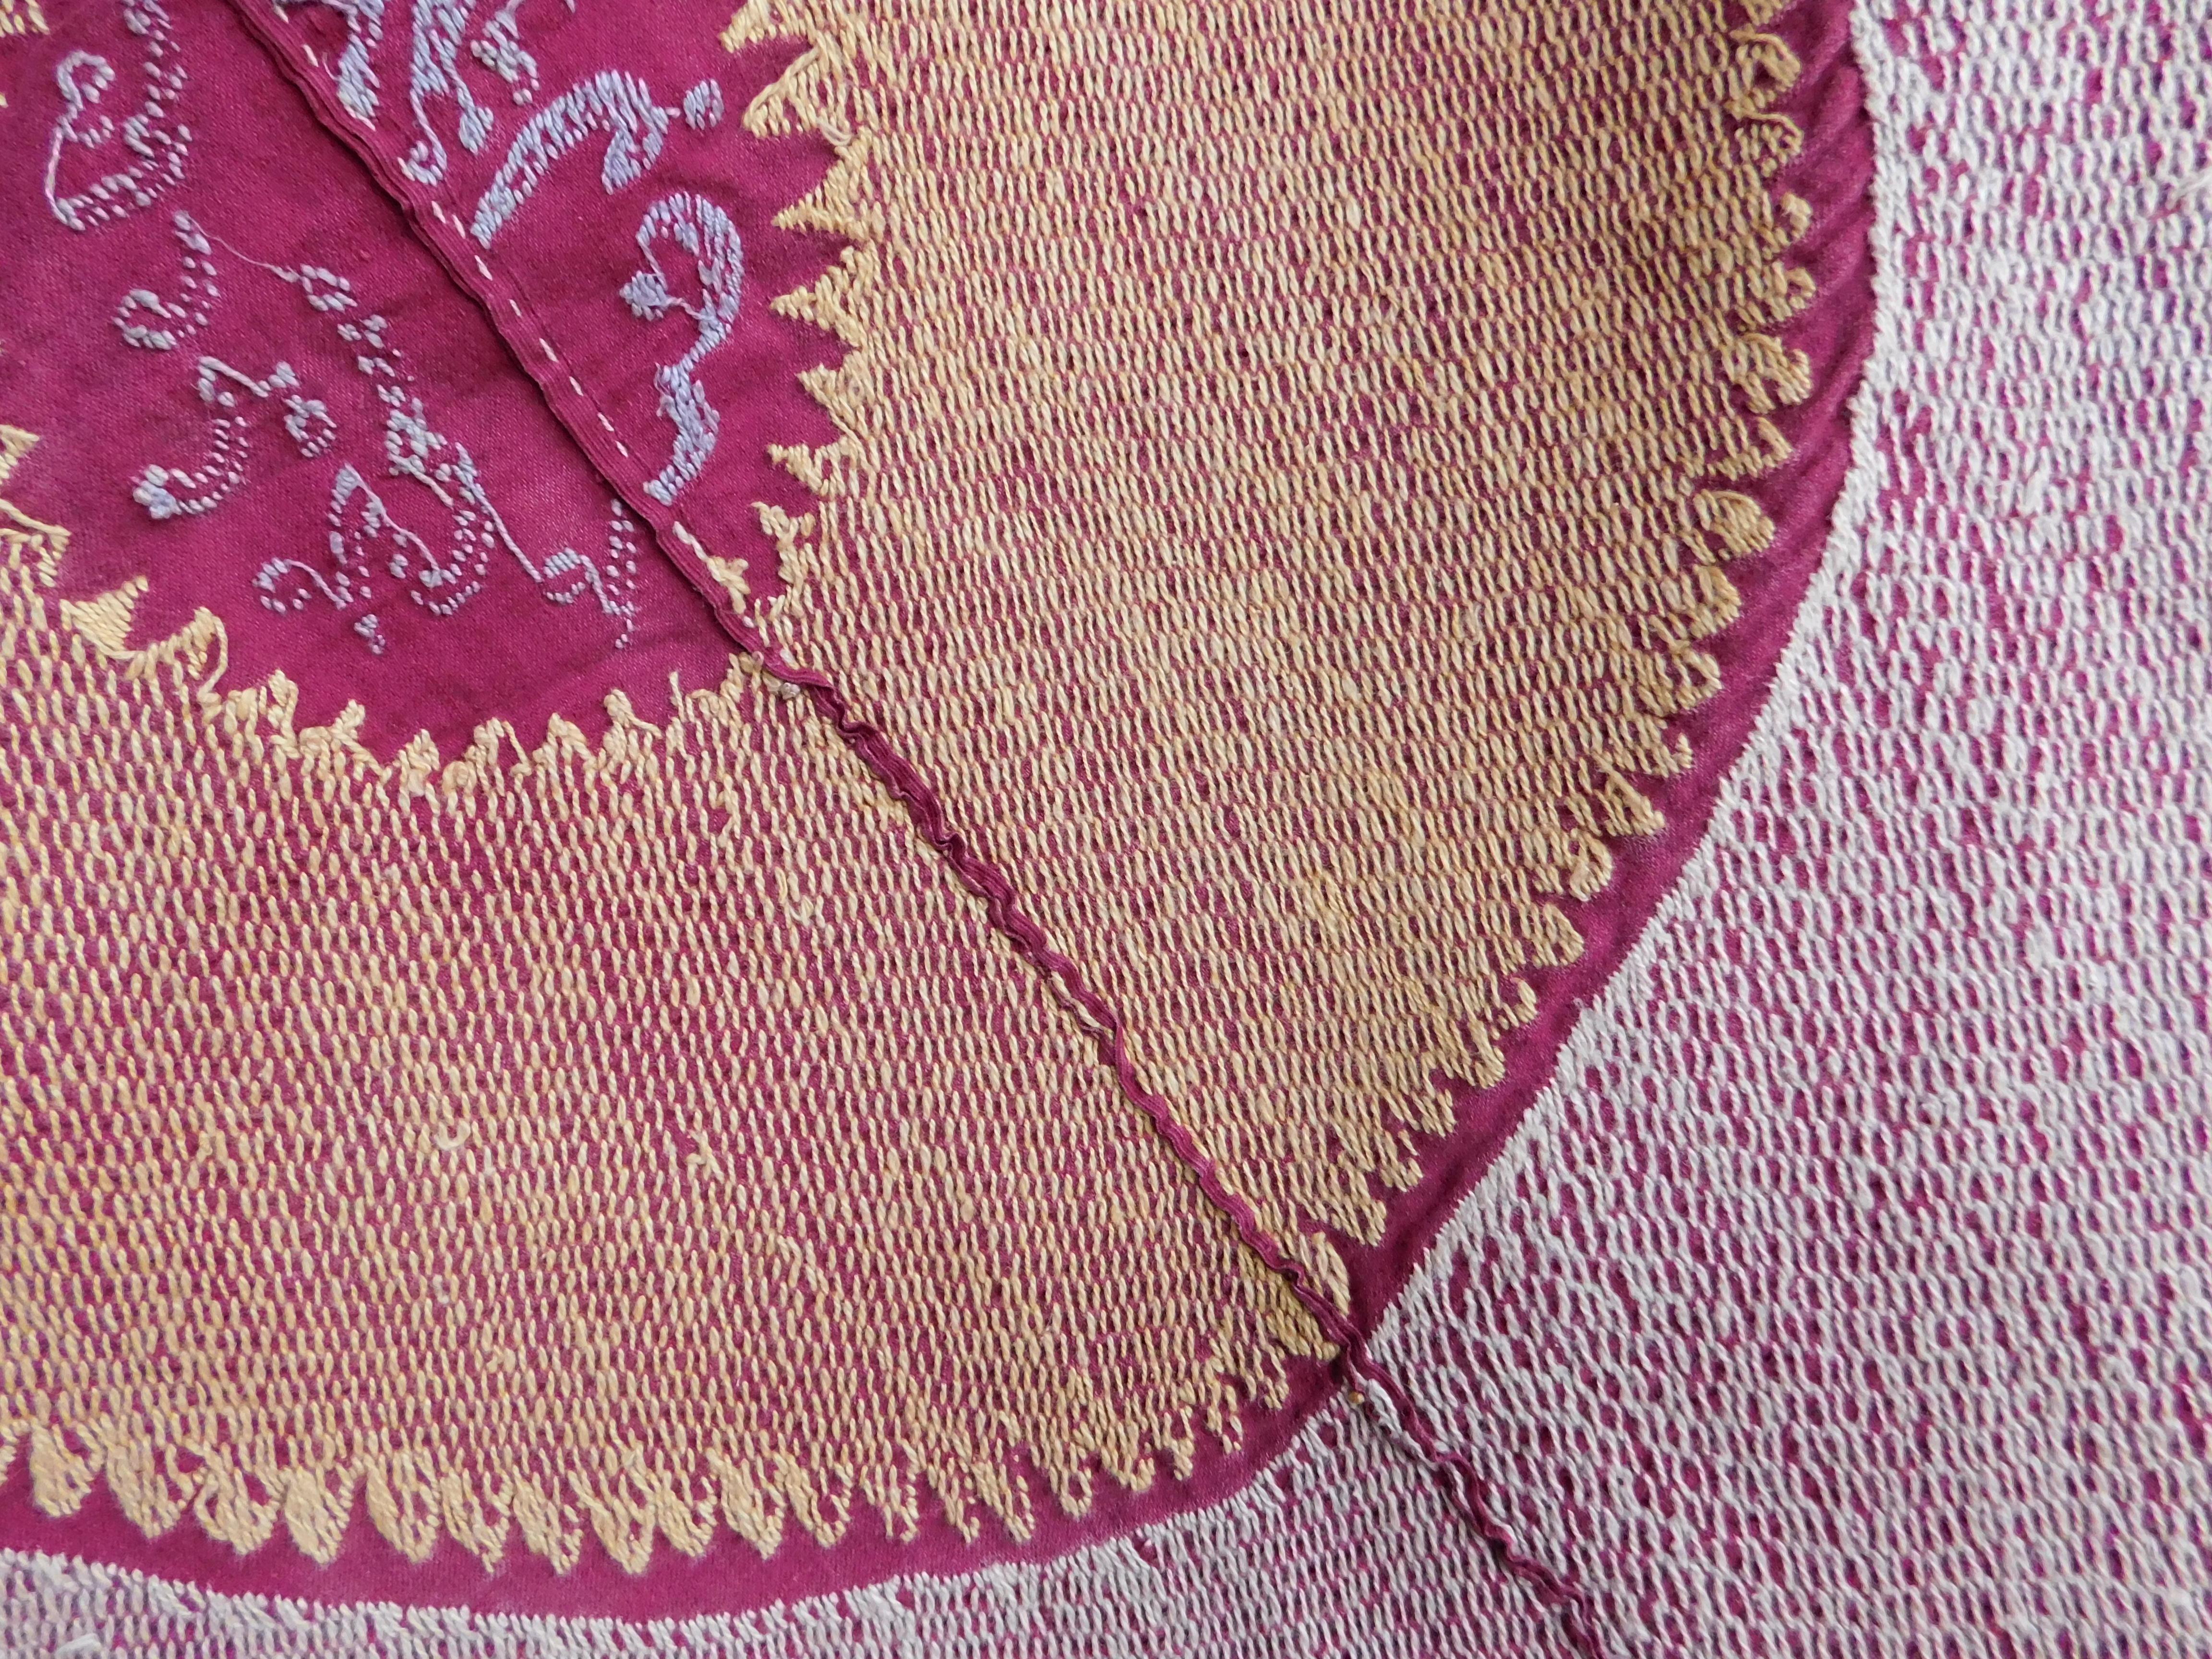  Suzani Samerand Wall Hanging Tapestry Raspberry, Peach and Lavender Embroidery im Angebot 8